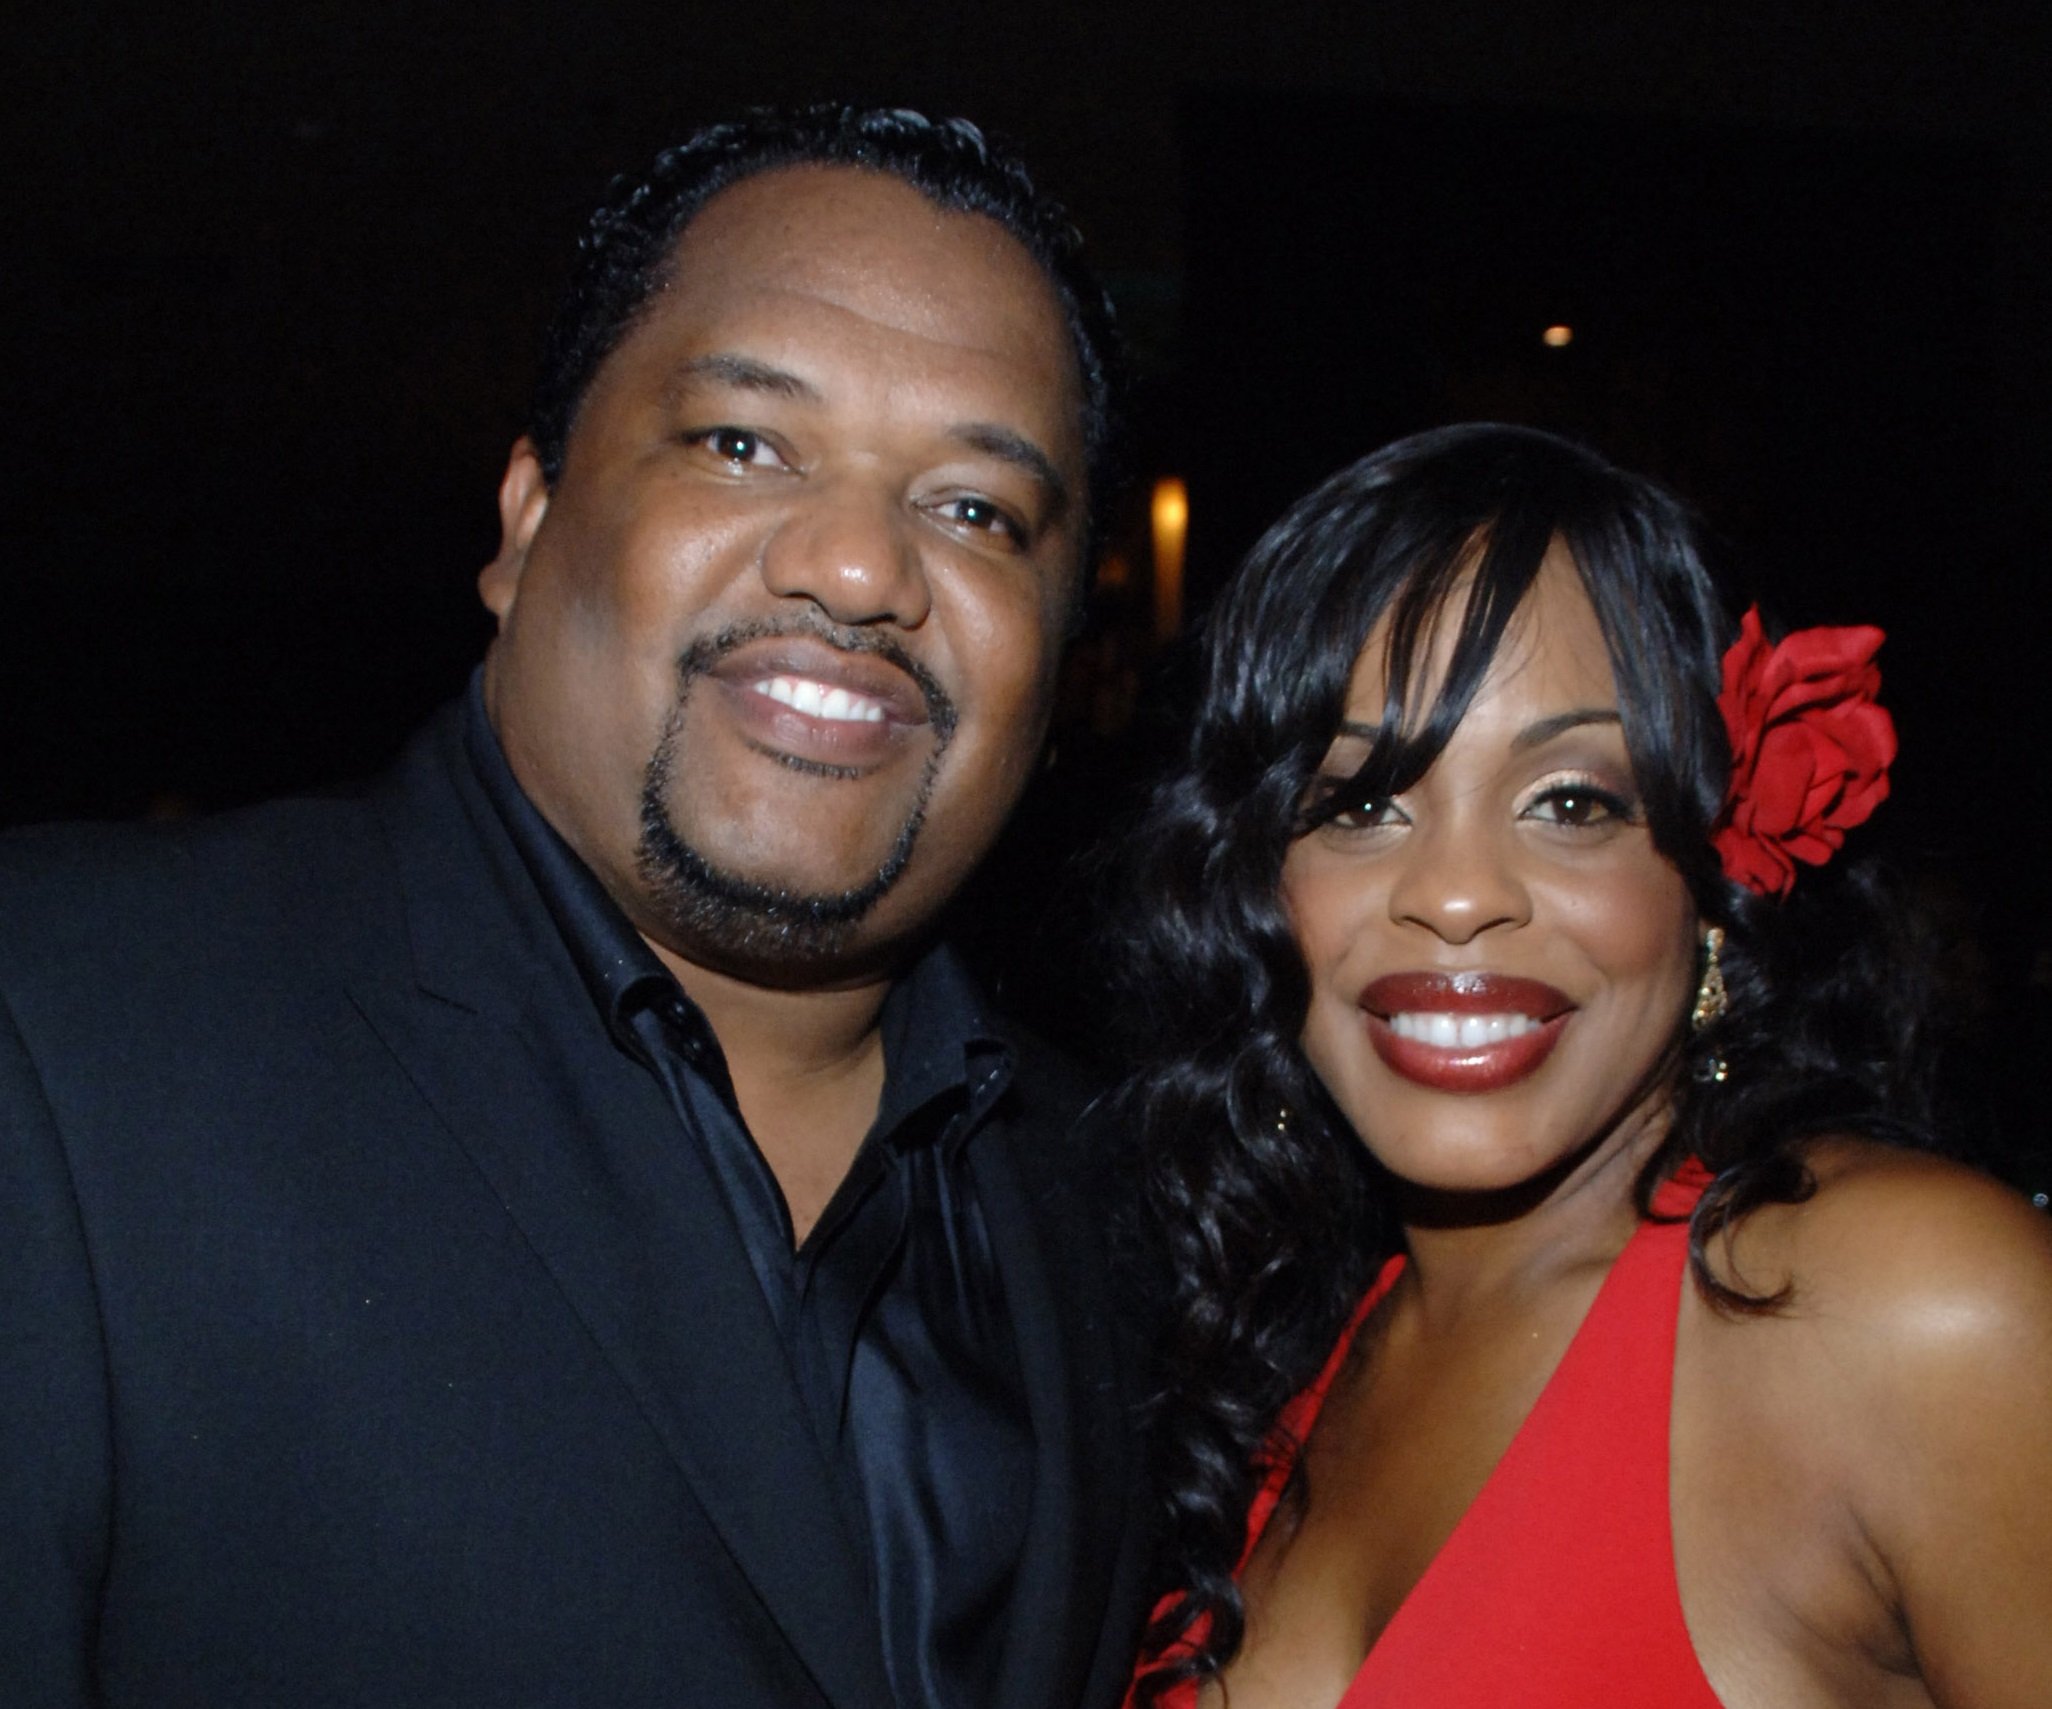 Don Nash and Niecy Nash during Niecy Nash Birthday Celebration - March 1, 2006 at White Lotus in Los Angeles